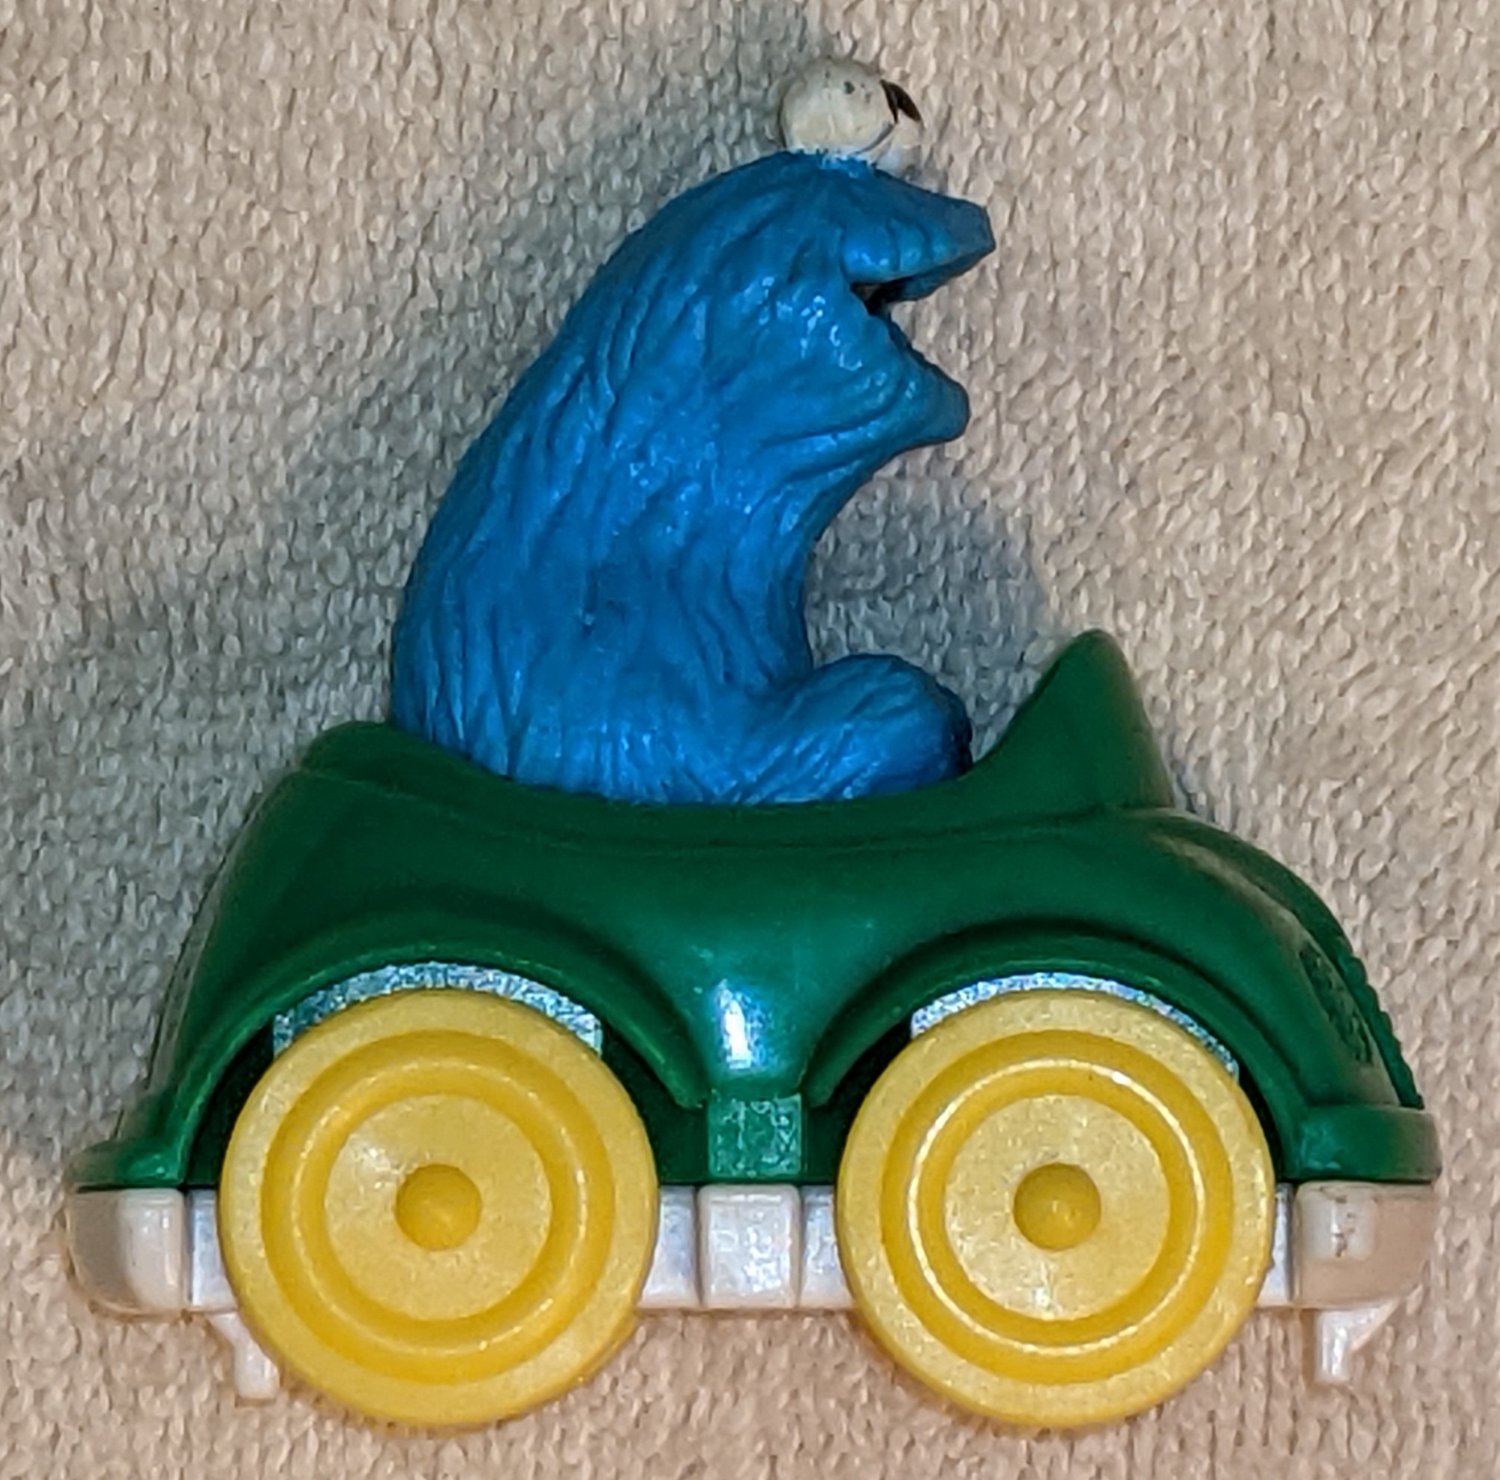 Sesame Street Continuous Action Roller Coaster Replacement Part Cookie Monster Car ILLCO 1991